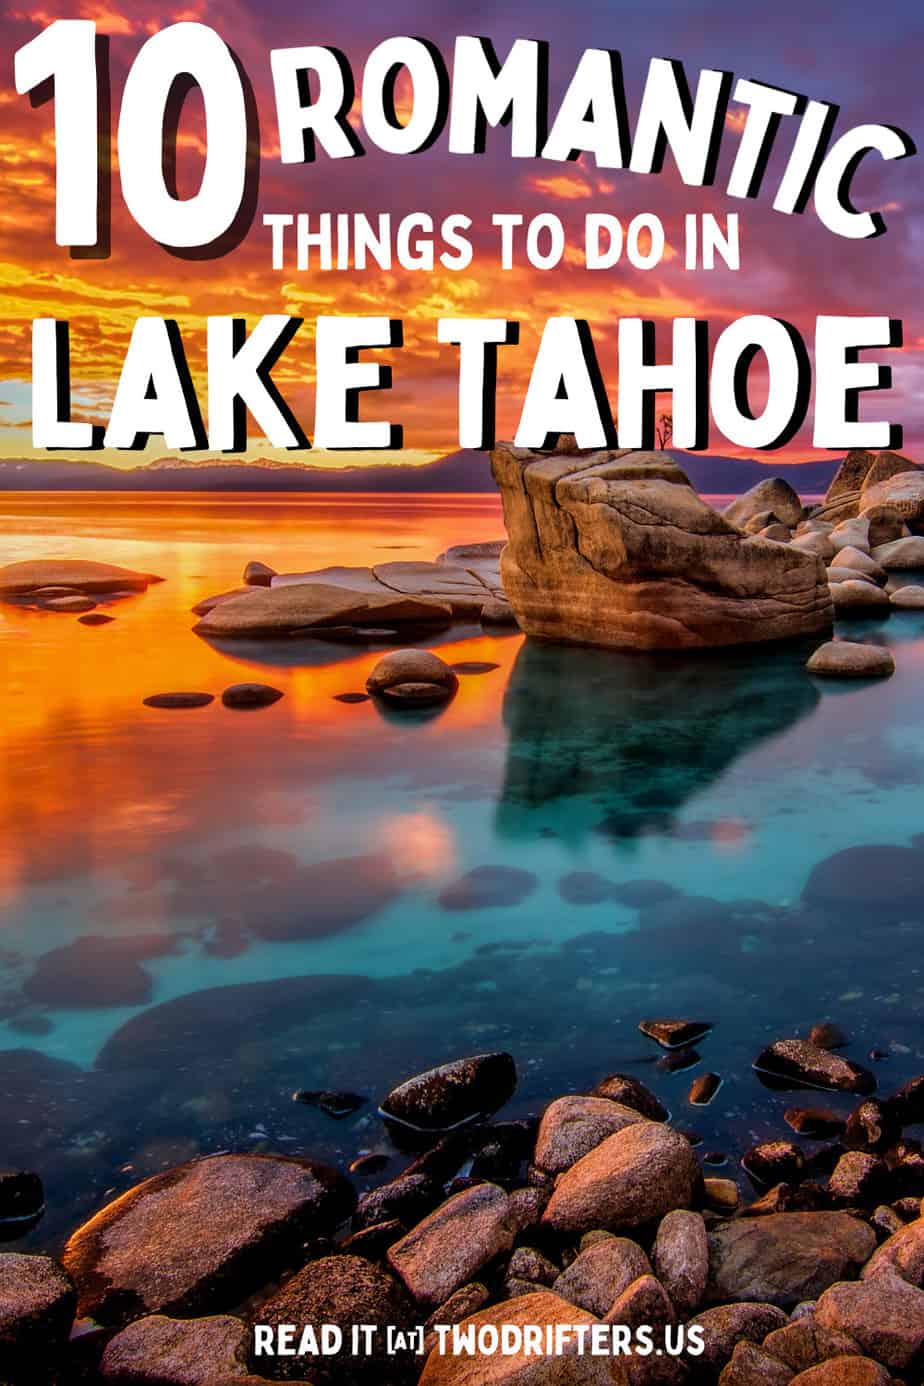 Pinterest social image that says “10 romantic things to do in Lake Tahoe.”